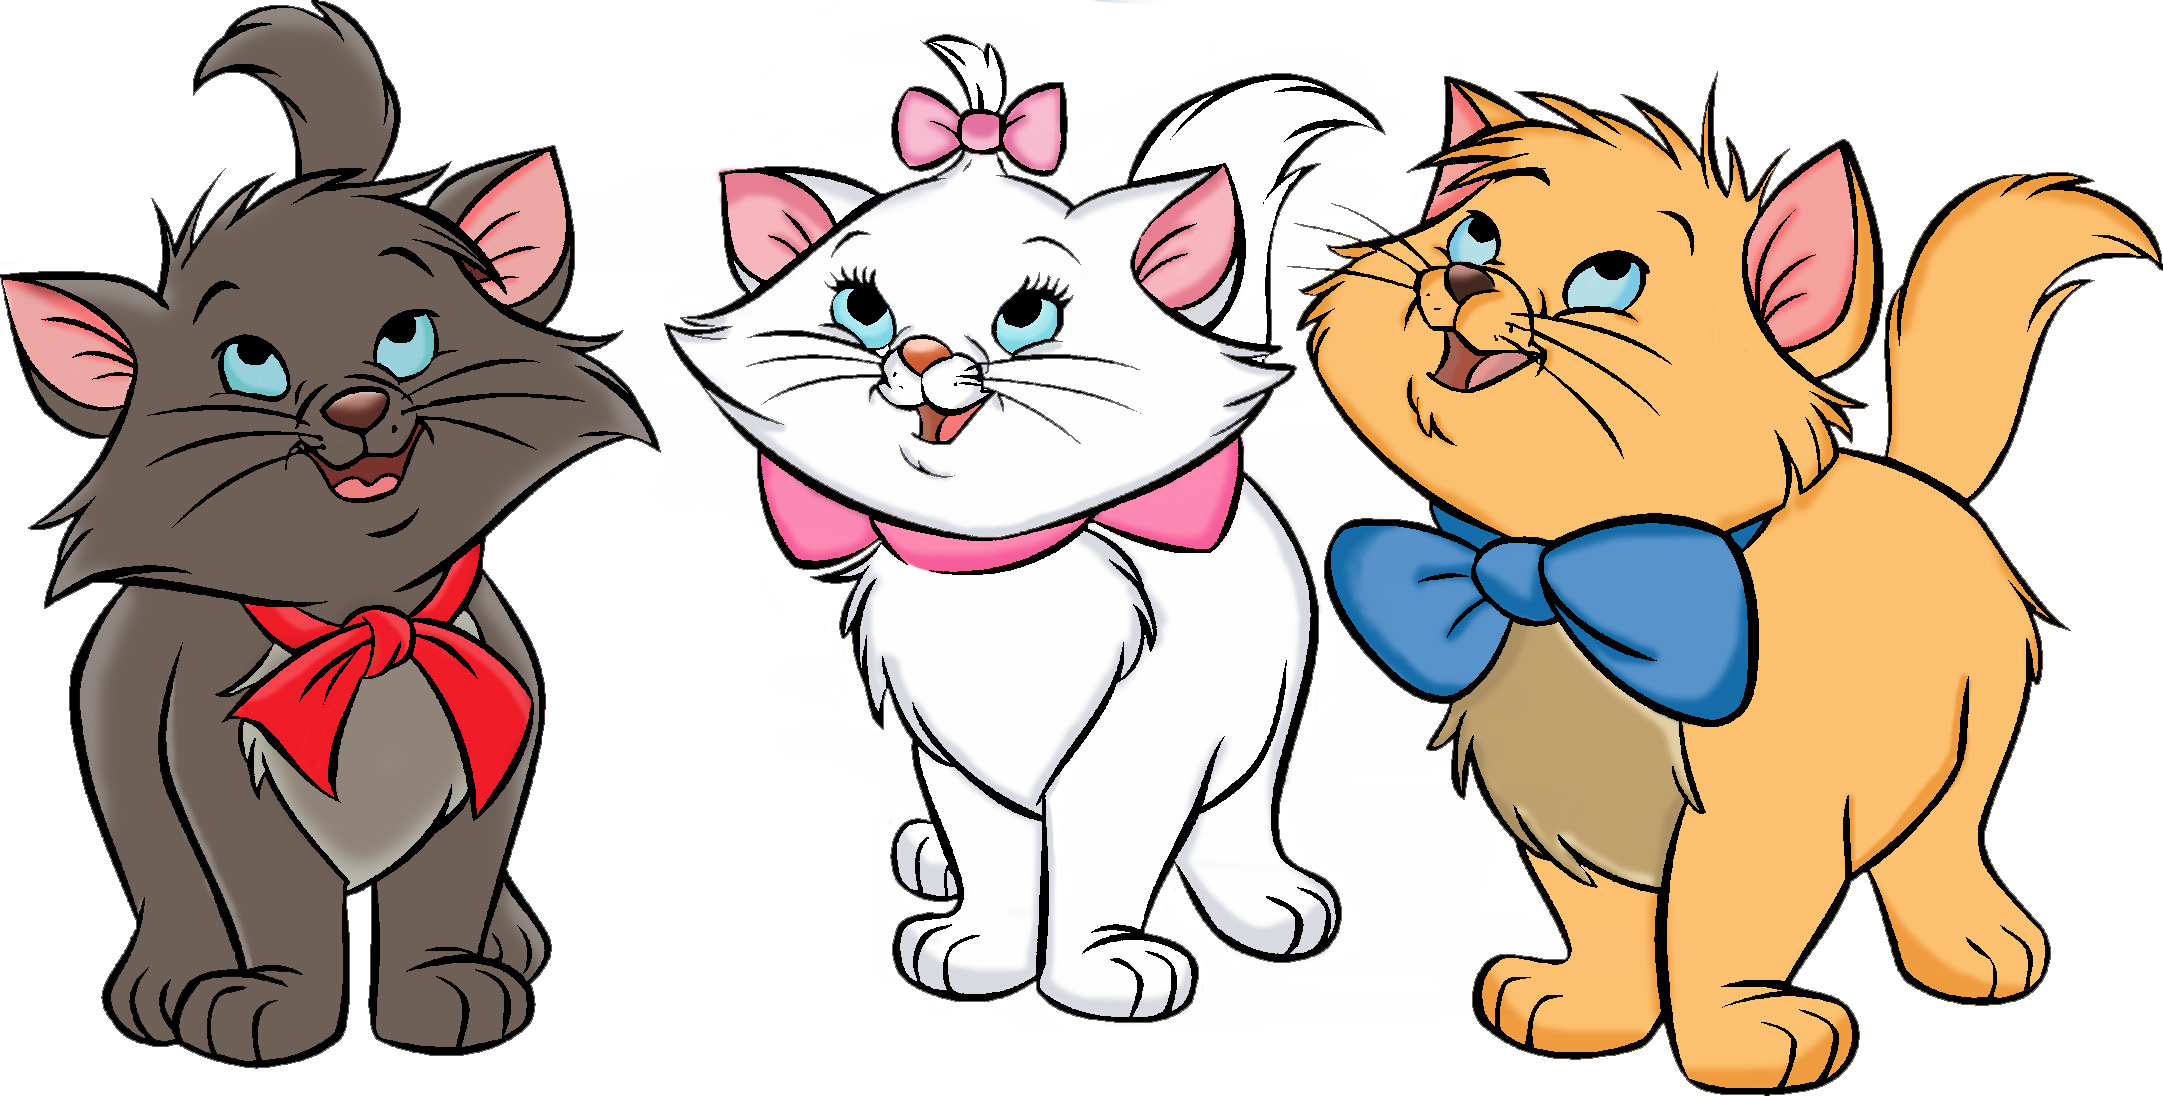 Aristocats wallpapers, Cartoon, HQ Aristocats pictures 4K Wallpapers 2019